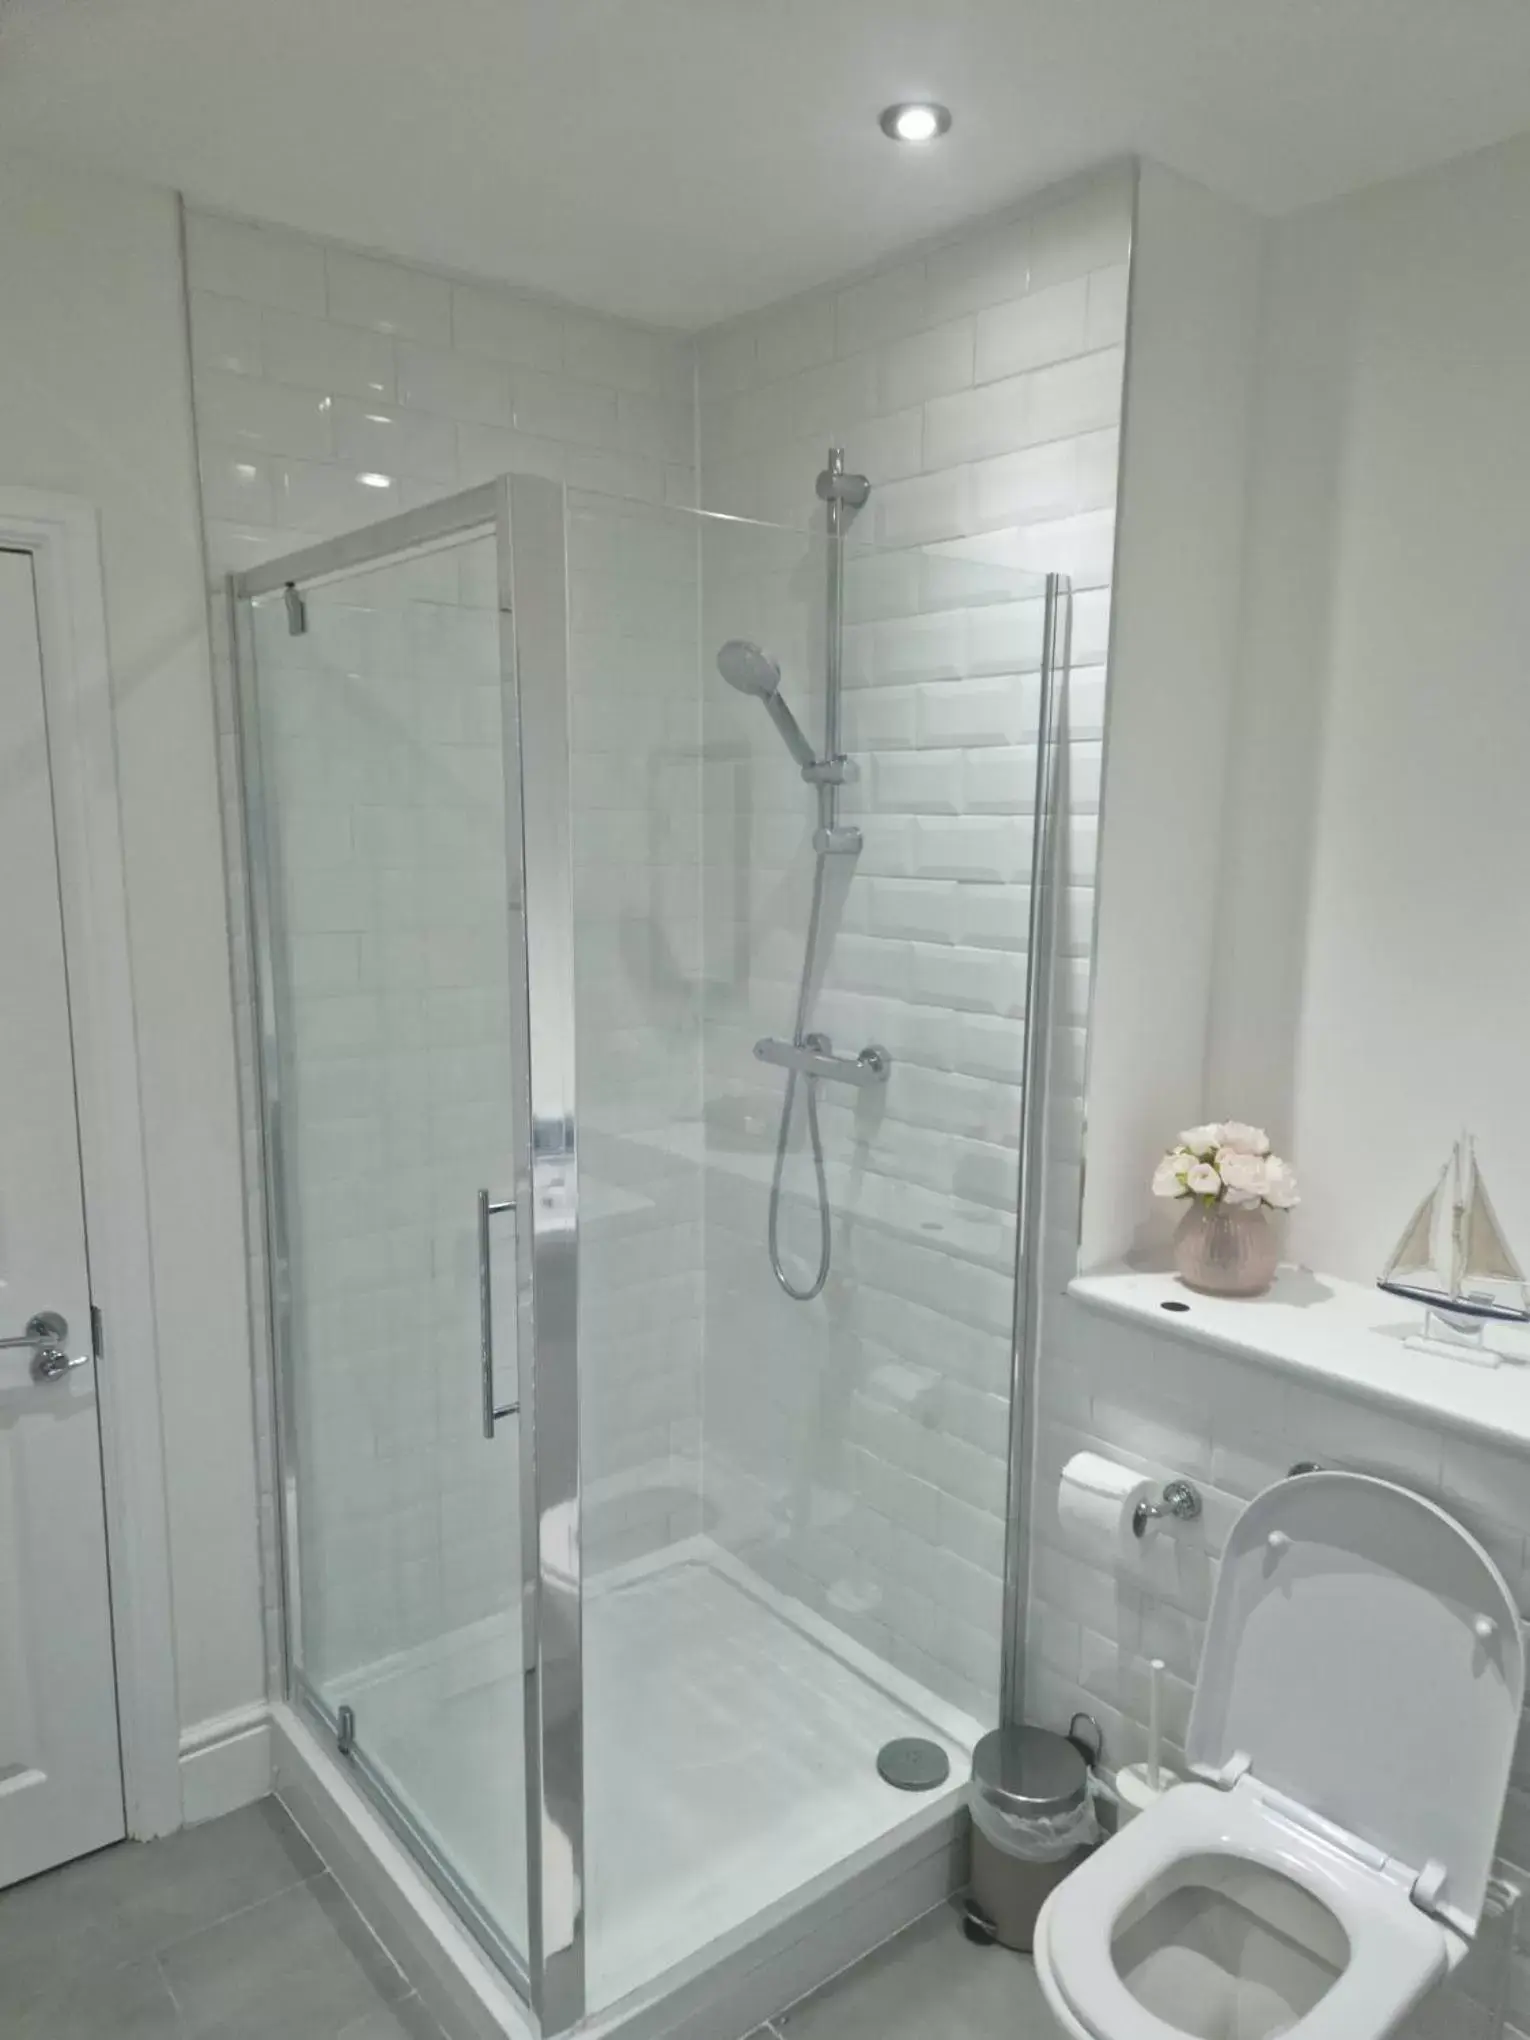 Bathroom in Wns Southend -on-Sea